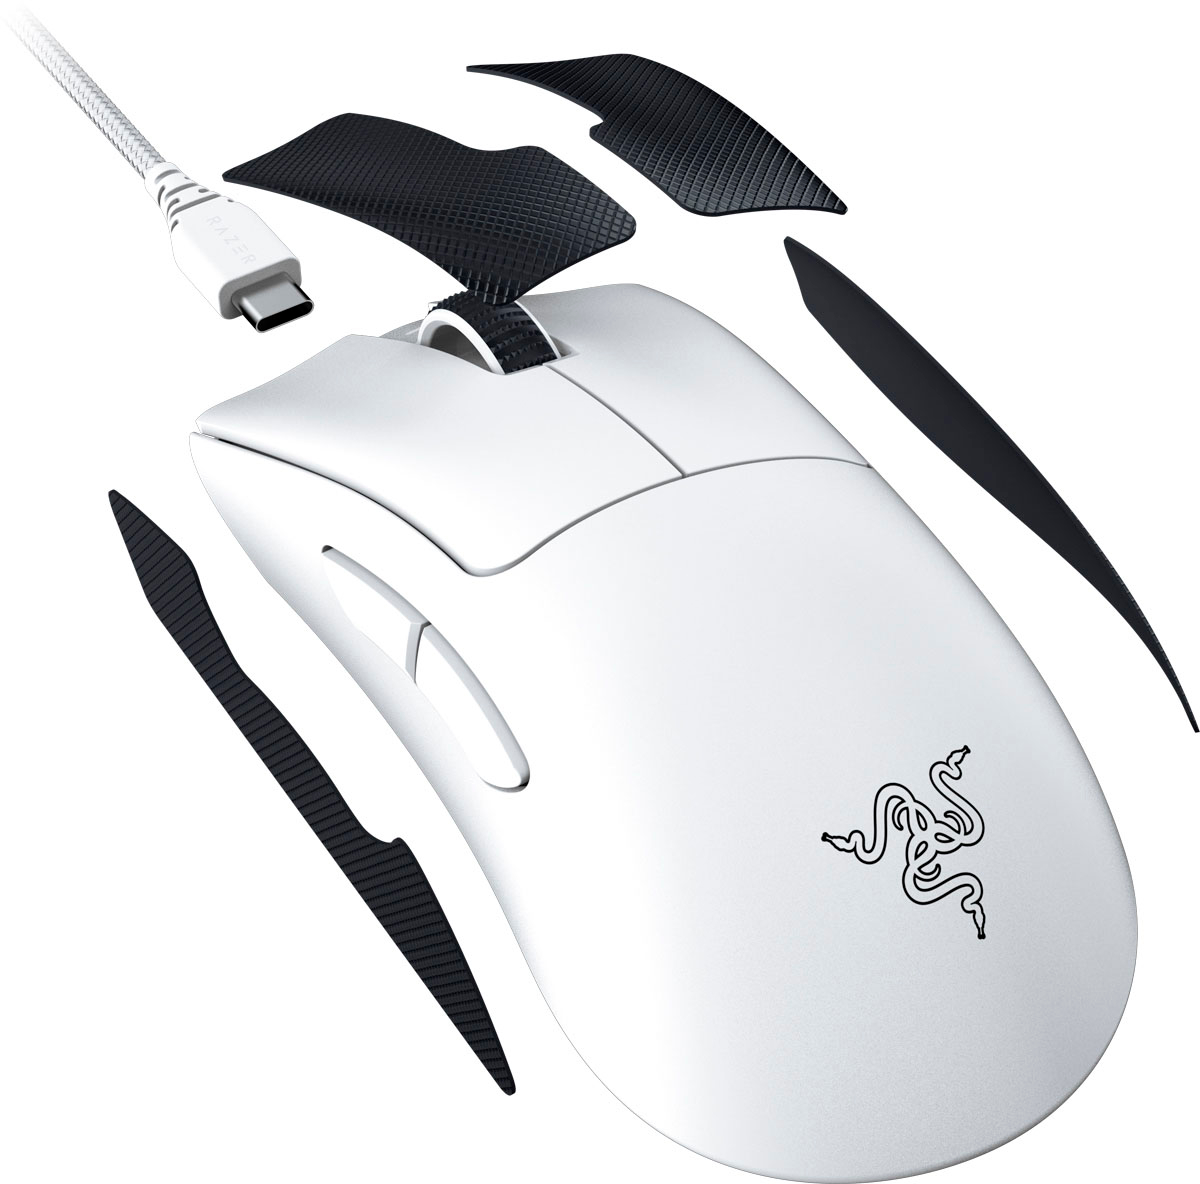 Razer DeathAdder V3 Pro Lightweight Wireless Optical Gaming Mouse with 90  Hour Battery White RZ01-04630200-R3U1 - Best Buy